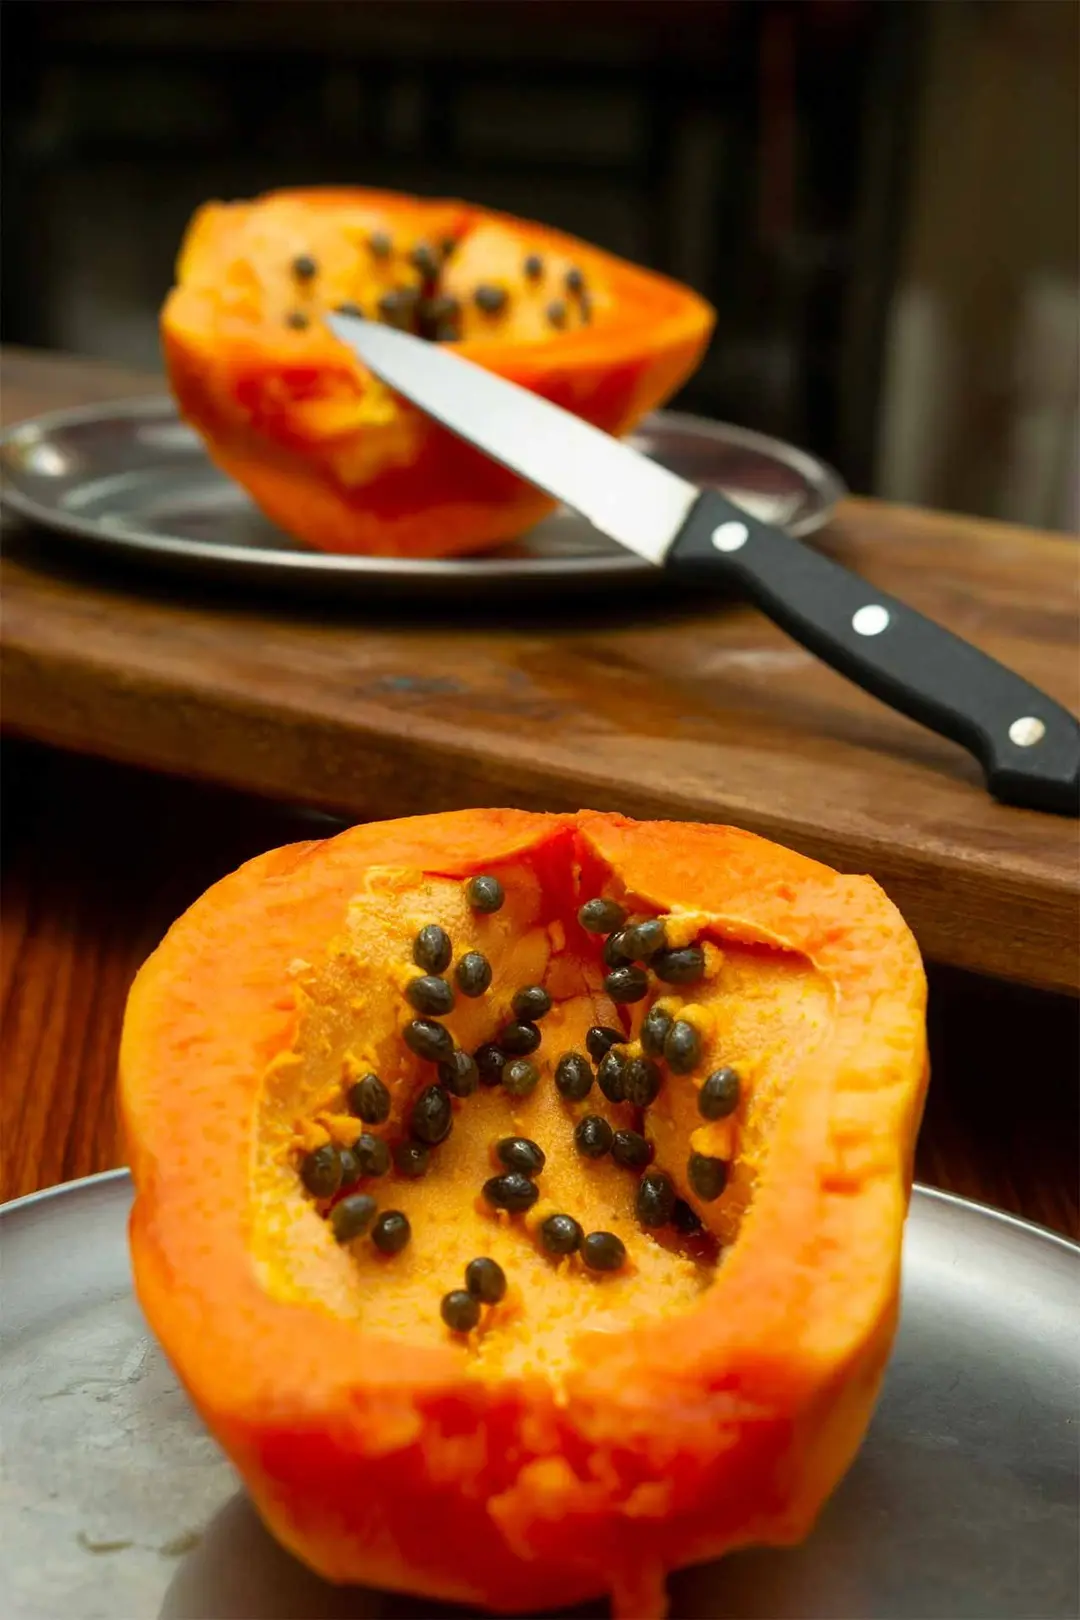 Nutritious and tasty, papaya is definitely a superfruit.